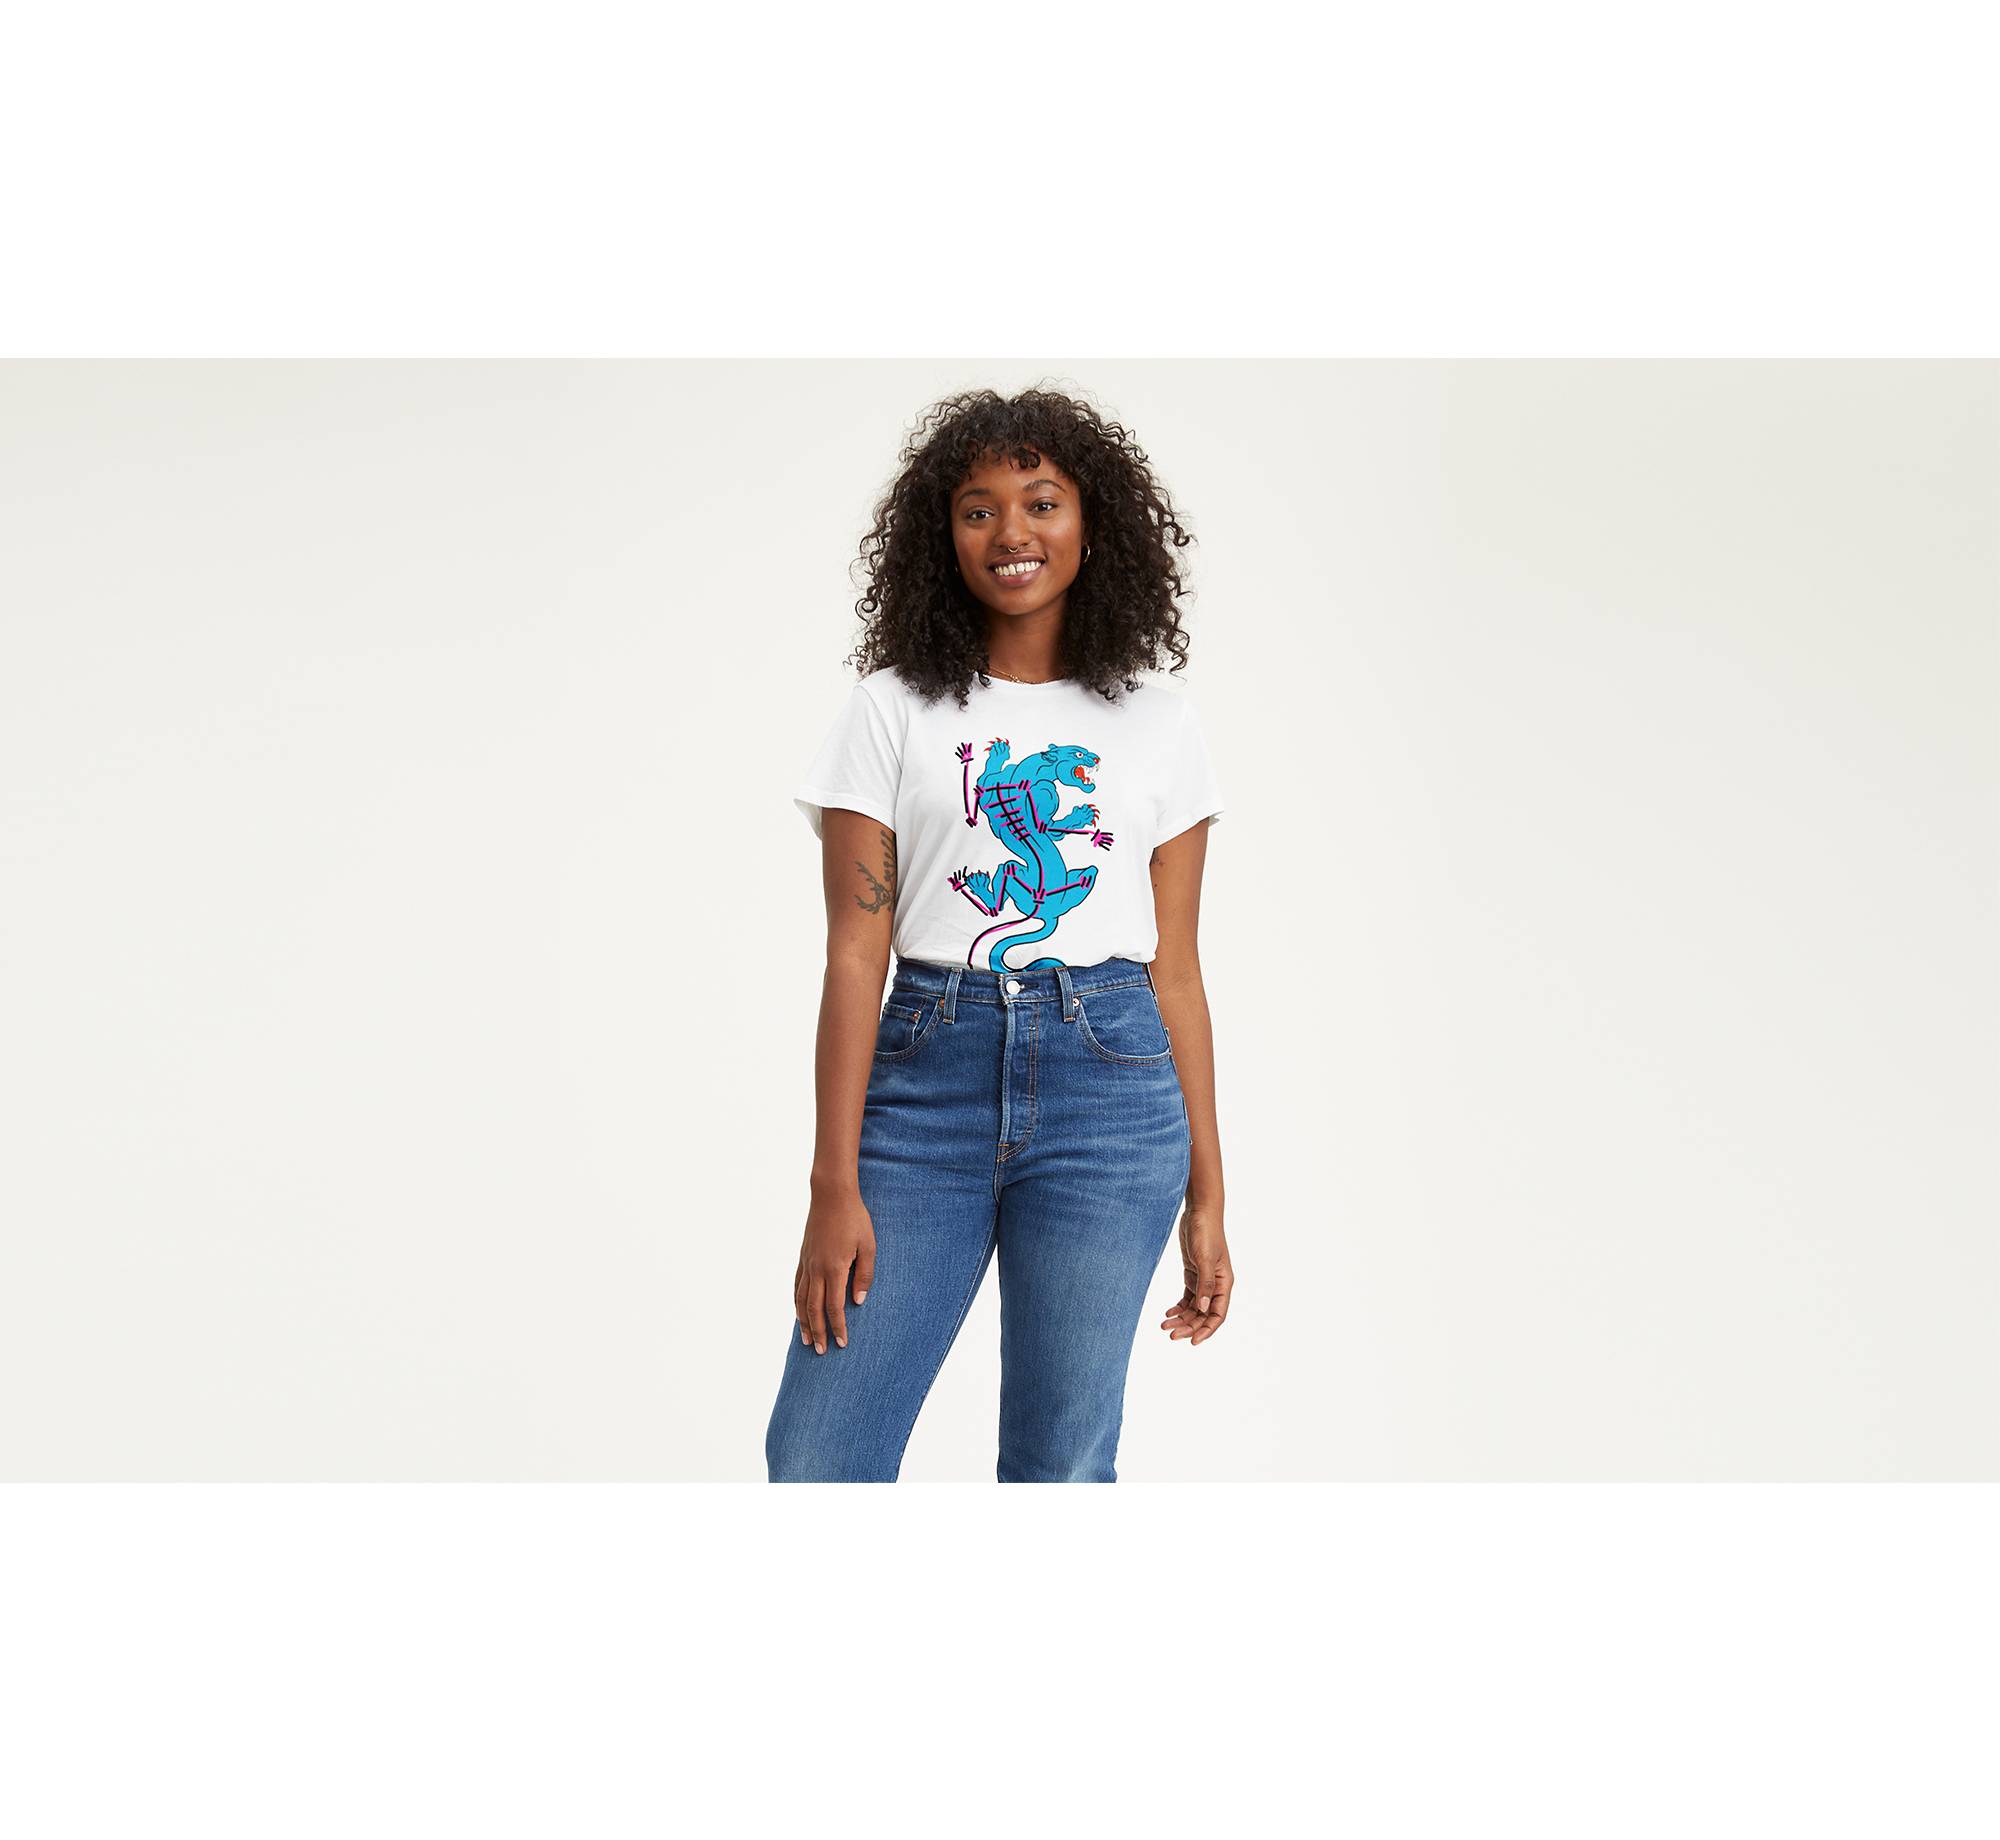 Levi's® x Gianni Lee Graphic Blue Panther Tee Shirt 1